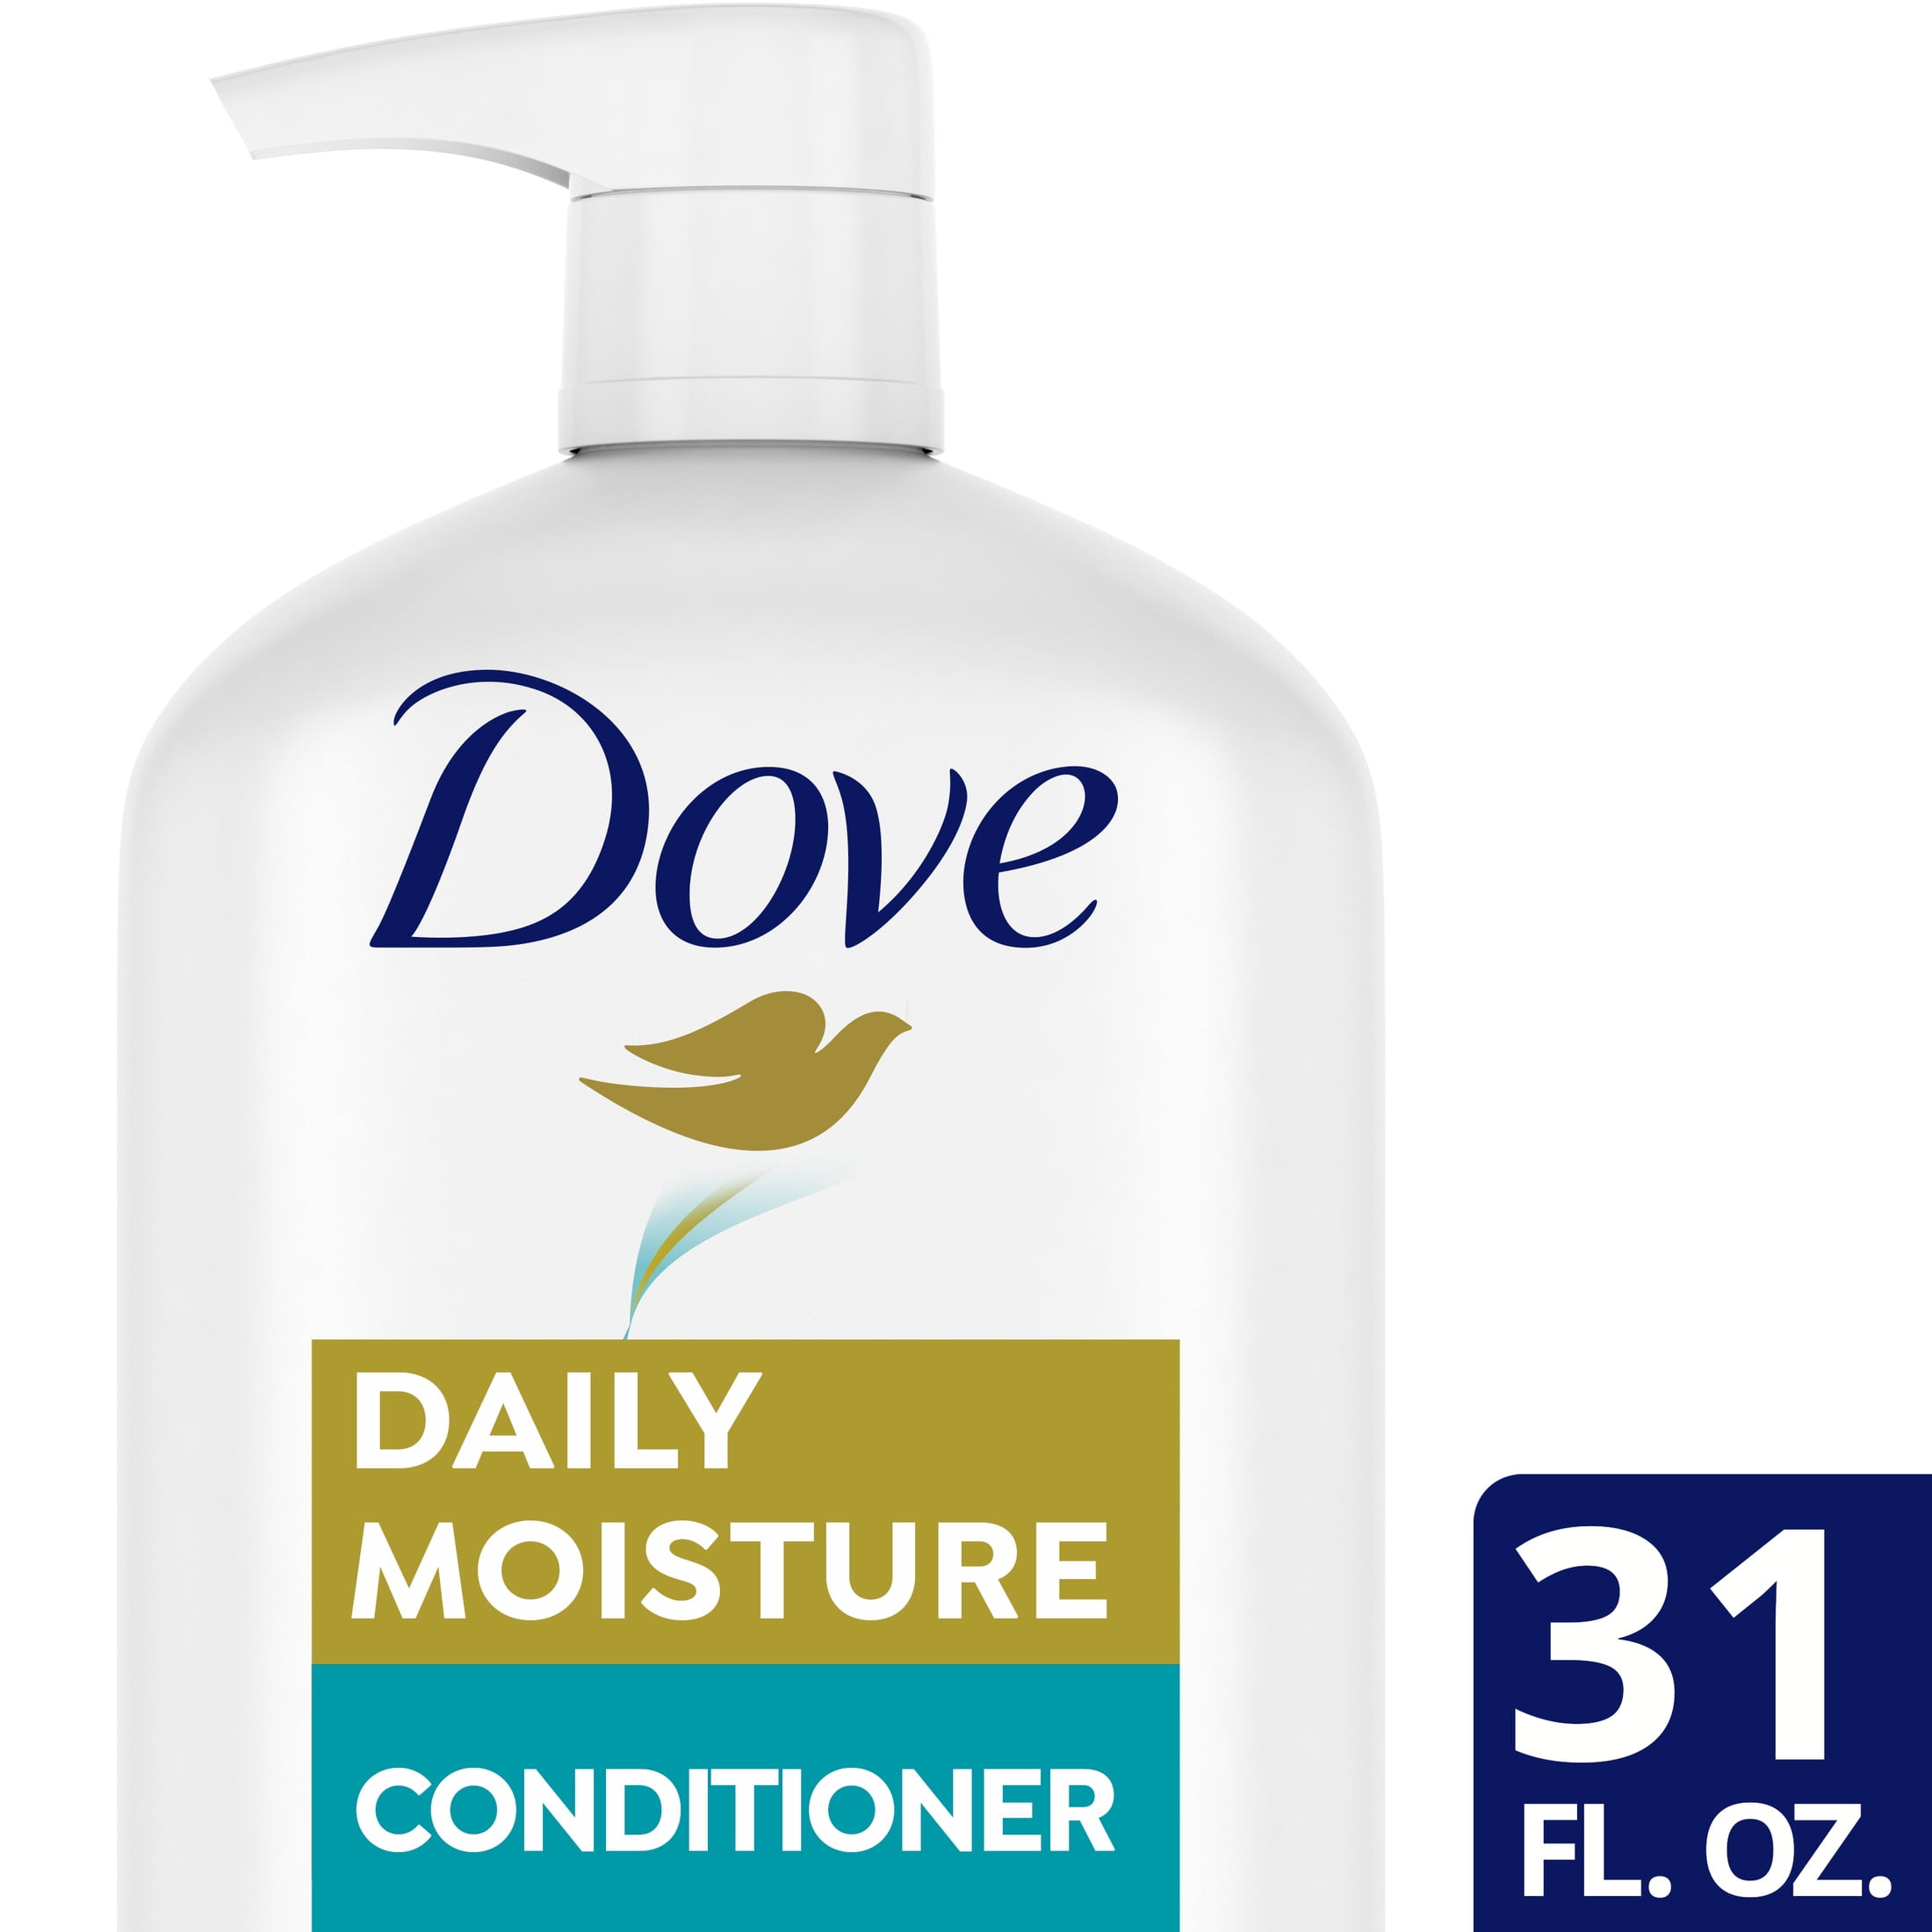 Dove Daily Moisture Conditioner for Dry Hair 31 fl oz 